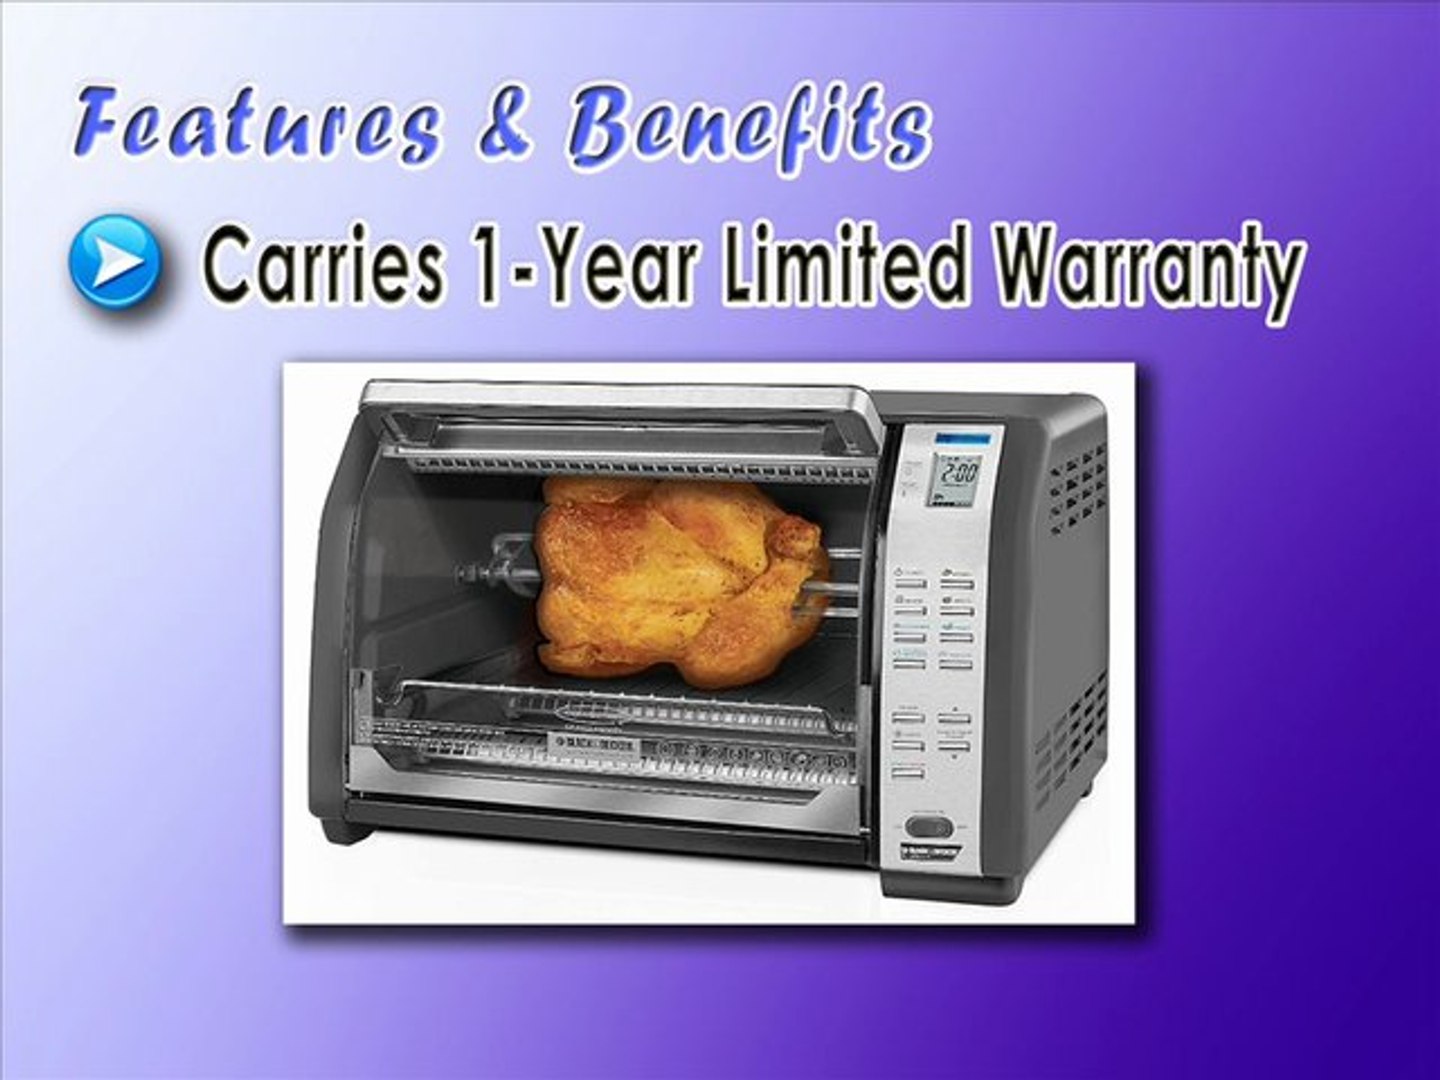 Buy a Toaster Oven, Toast-R-Oven Digital Rotisserie Convection Oven